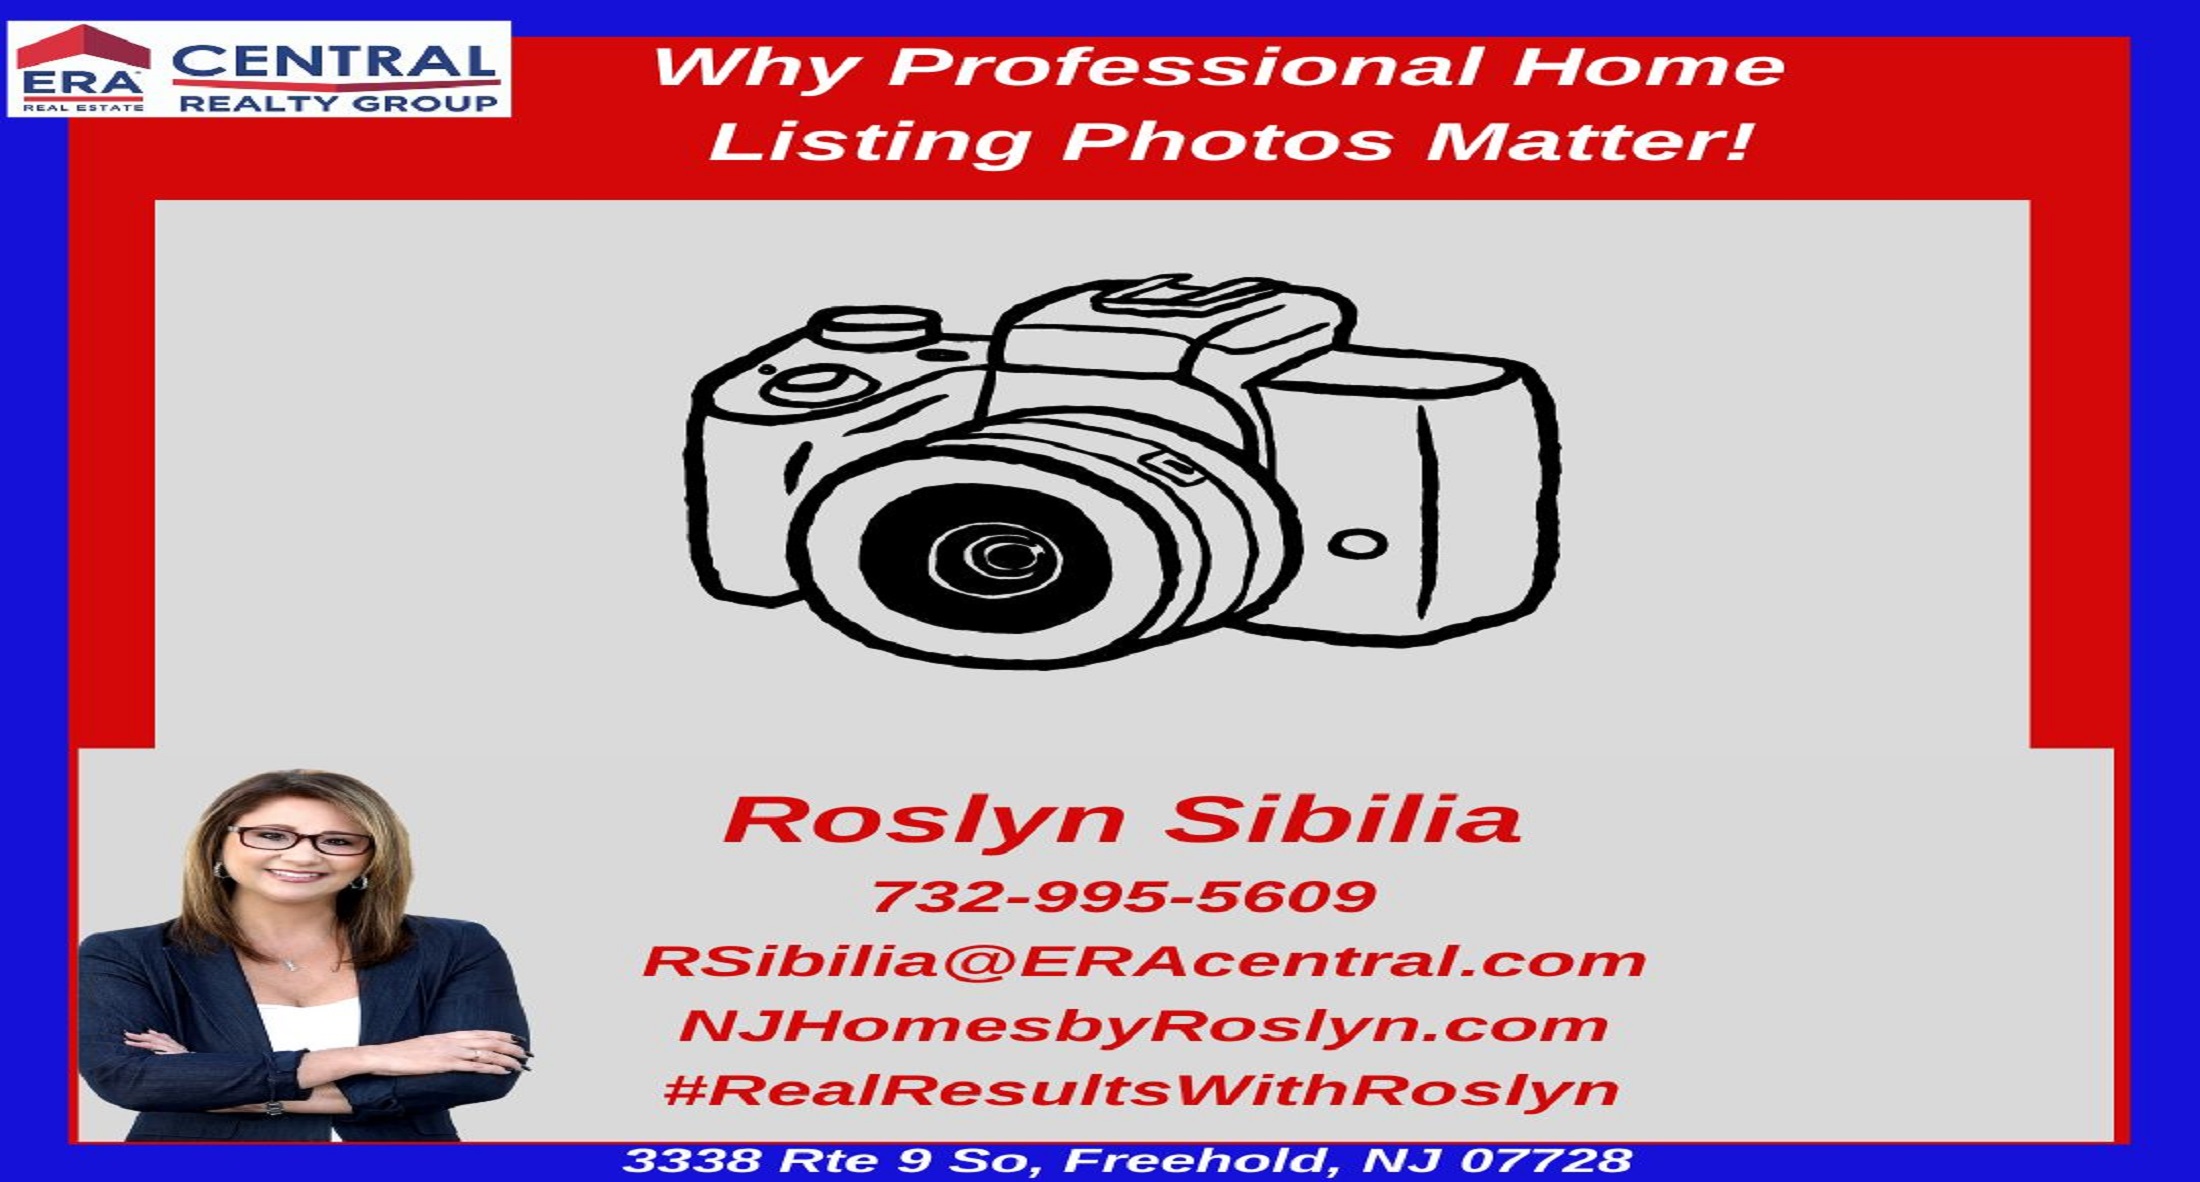 Why Professional Listing Photos Matter! - Roslyn Sibilia